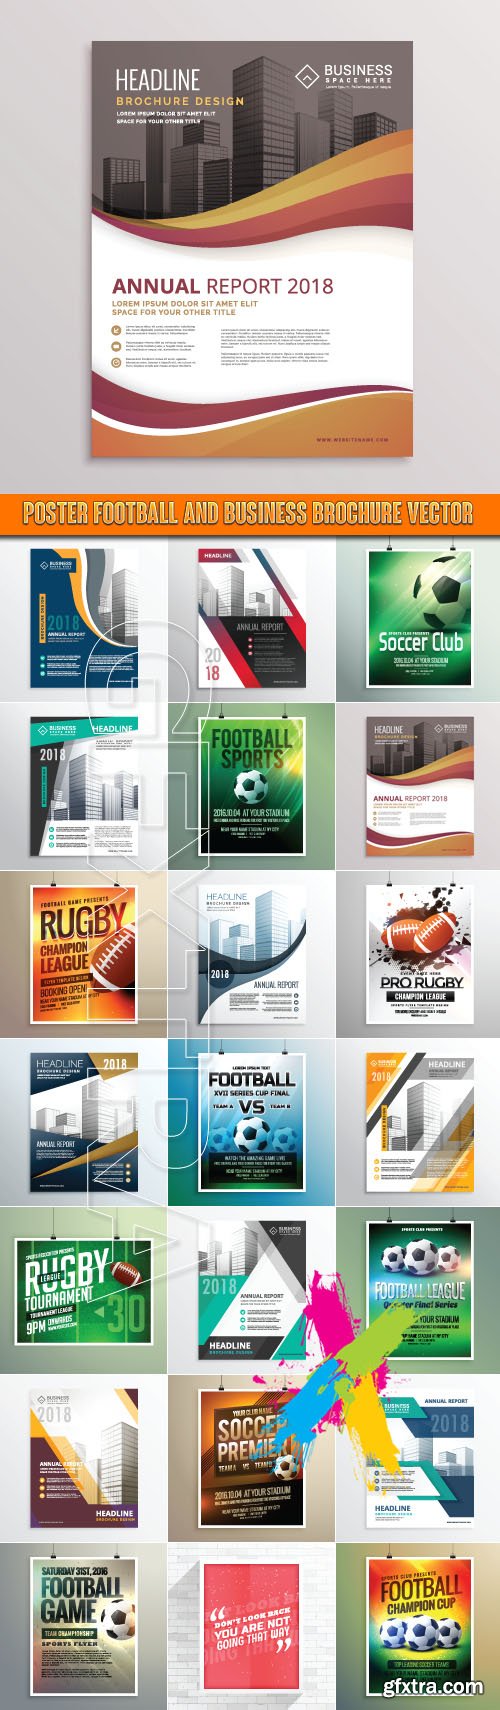 Poster football and business brochure vector